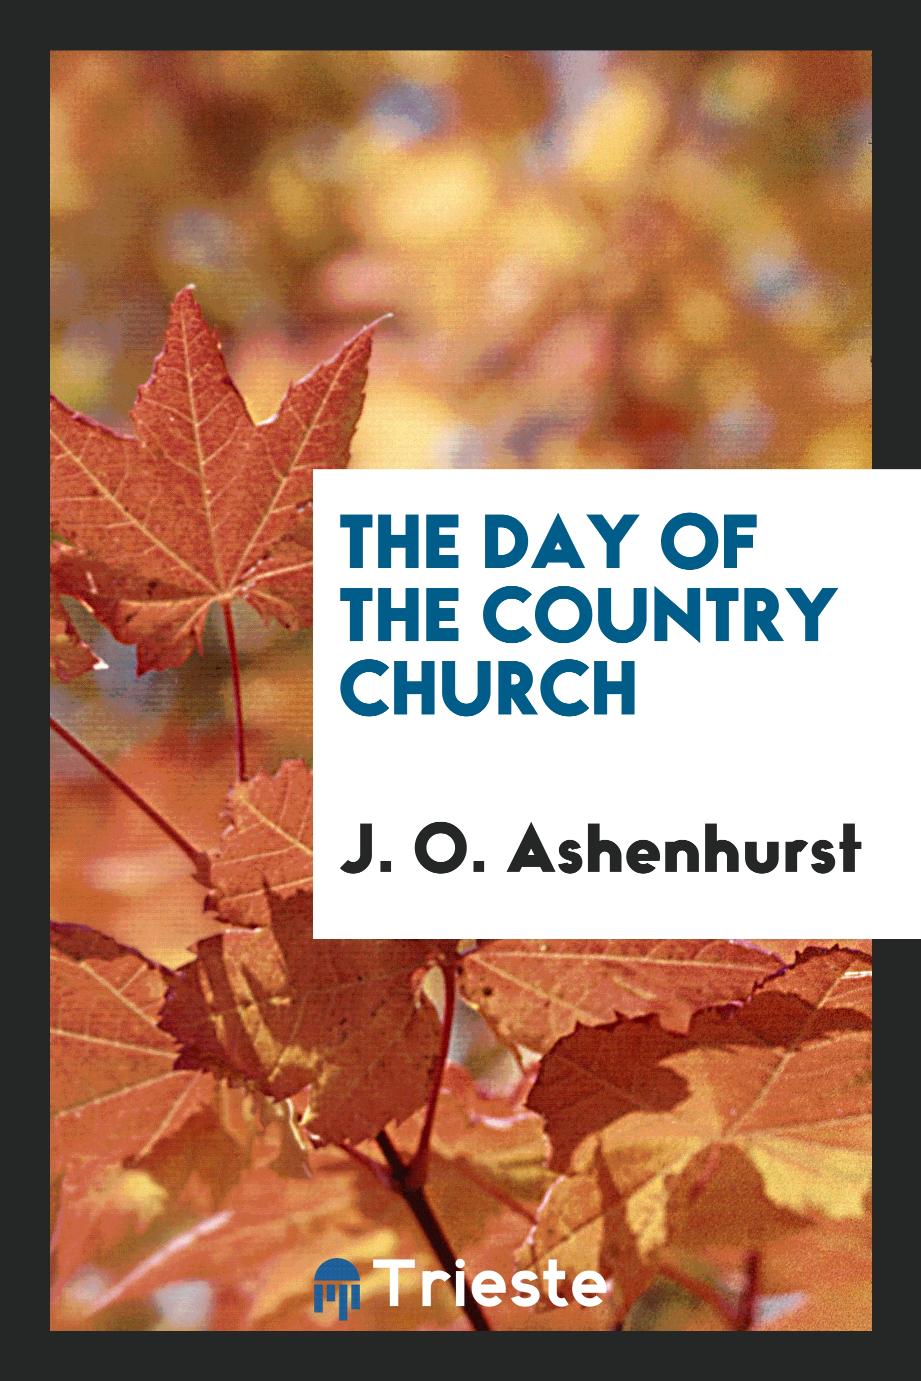 The Day of the Country Church